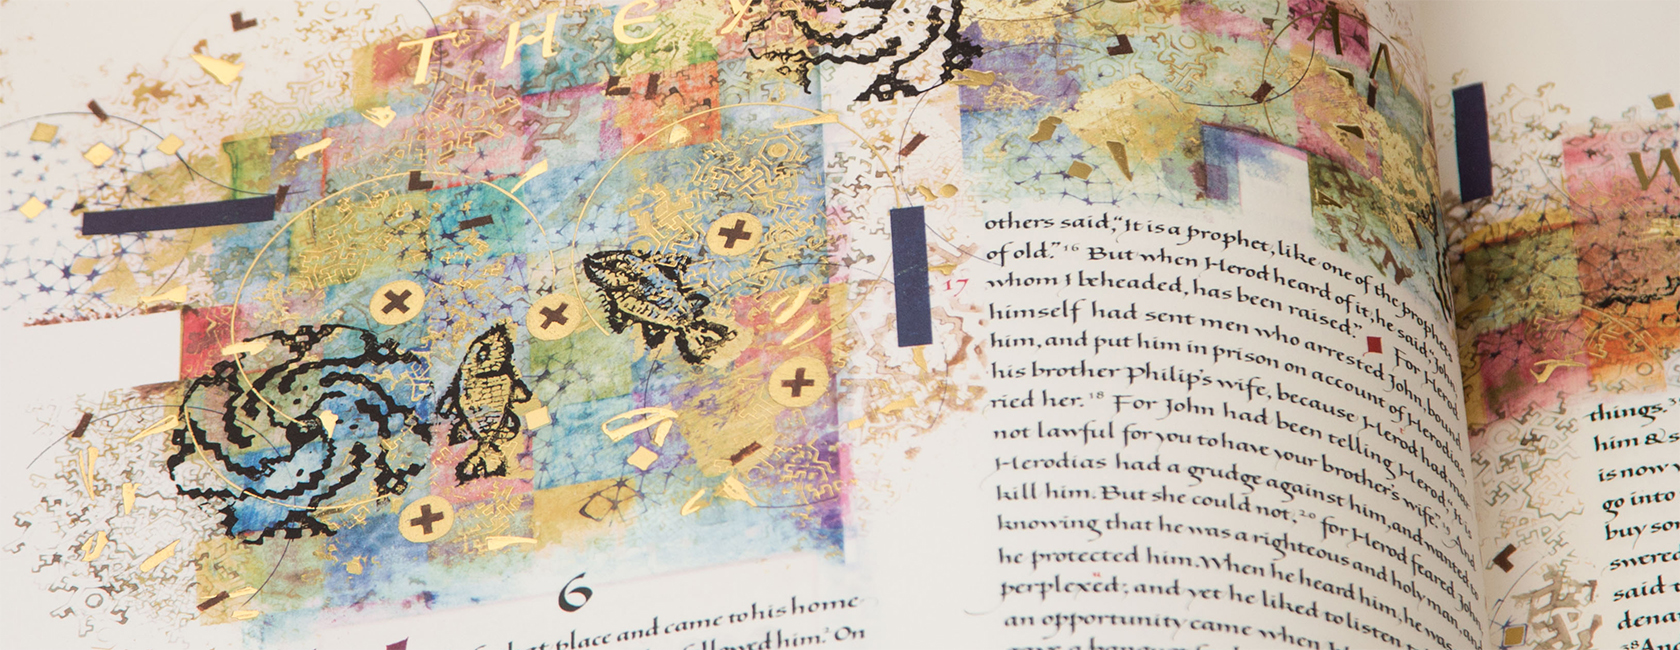 The Saint John’s Bible will be on display at PLU from September 2016 through May 2017.